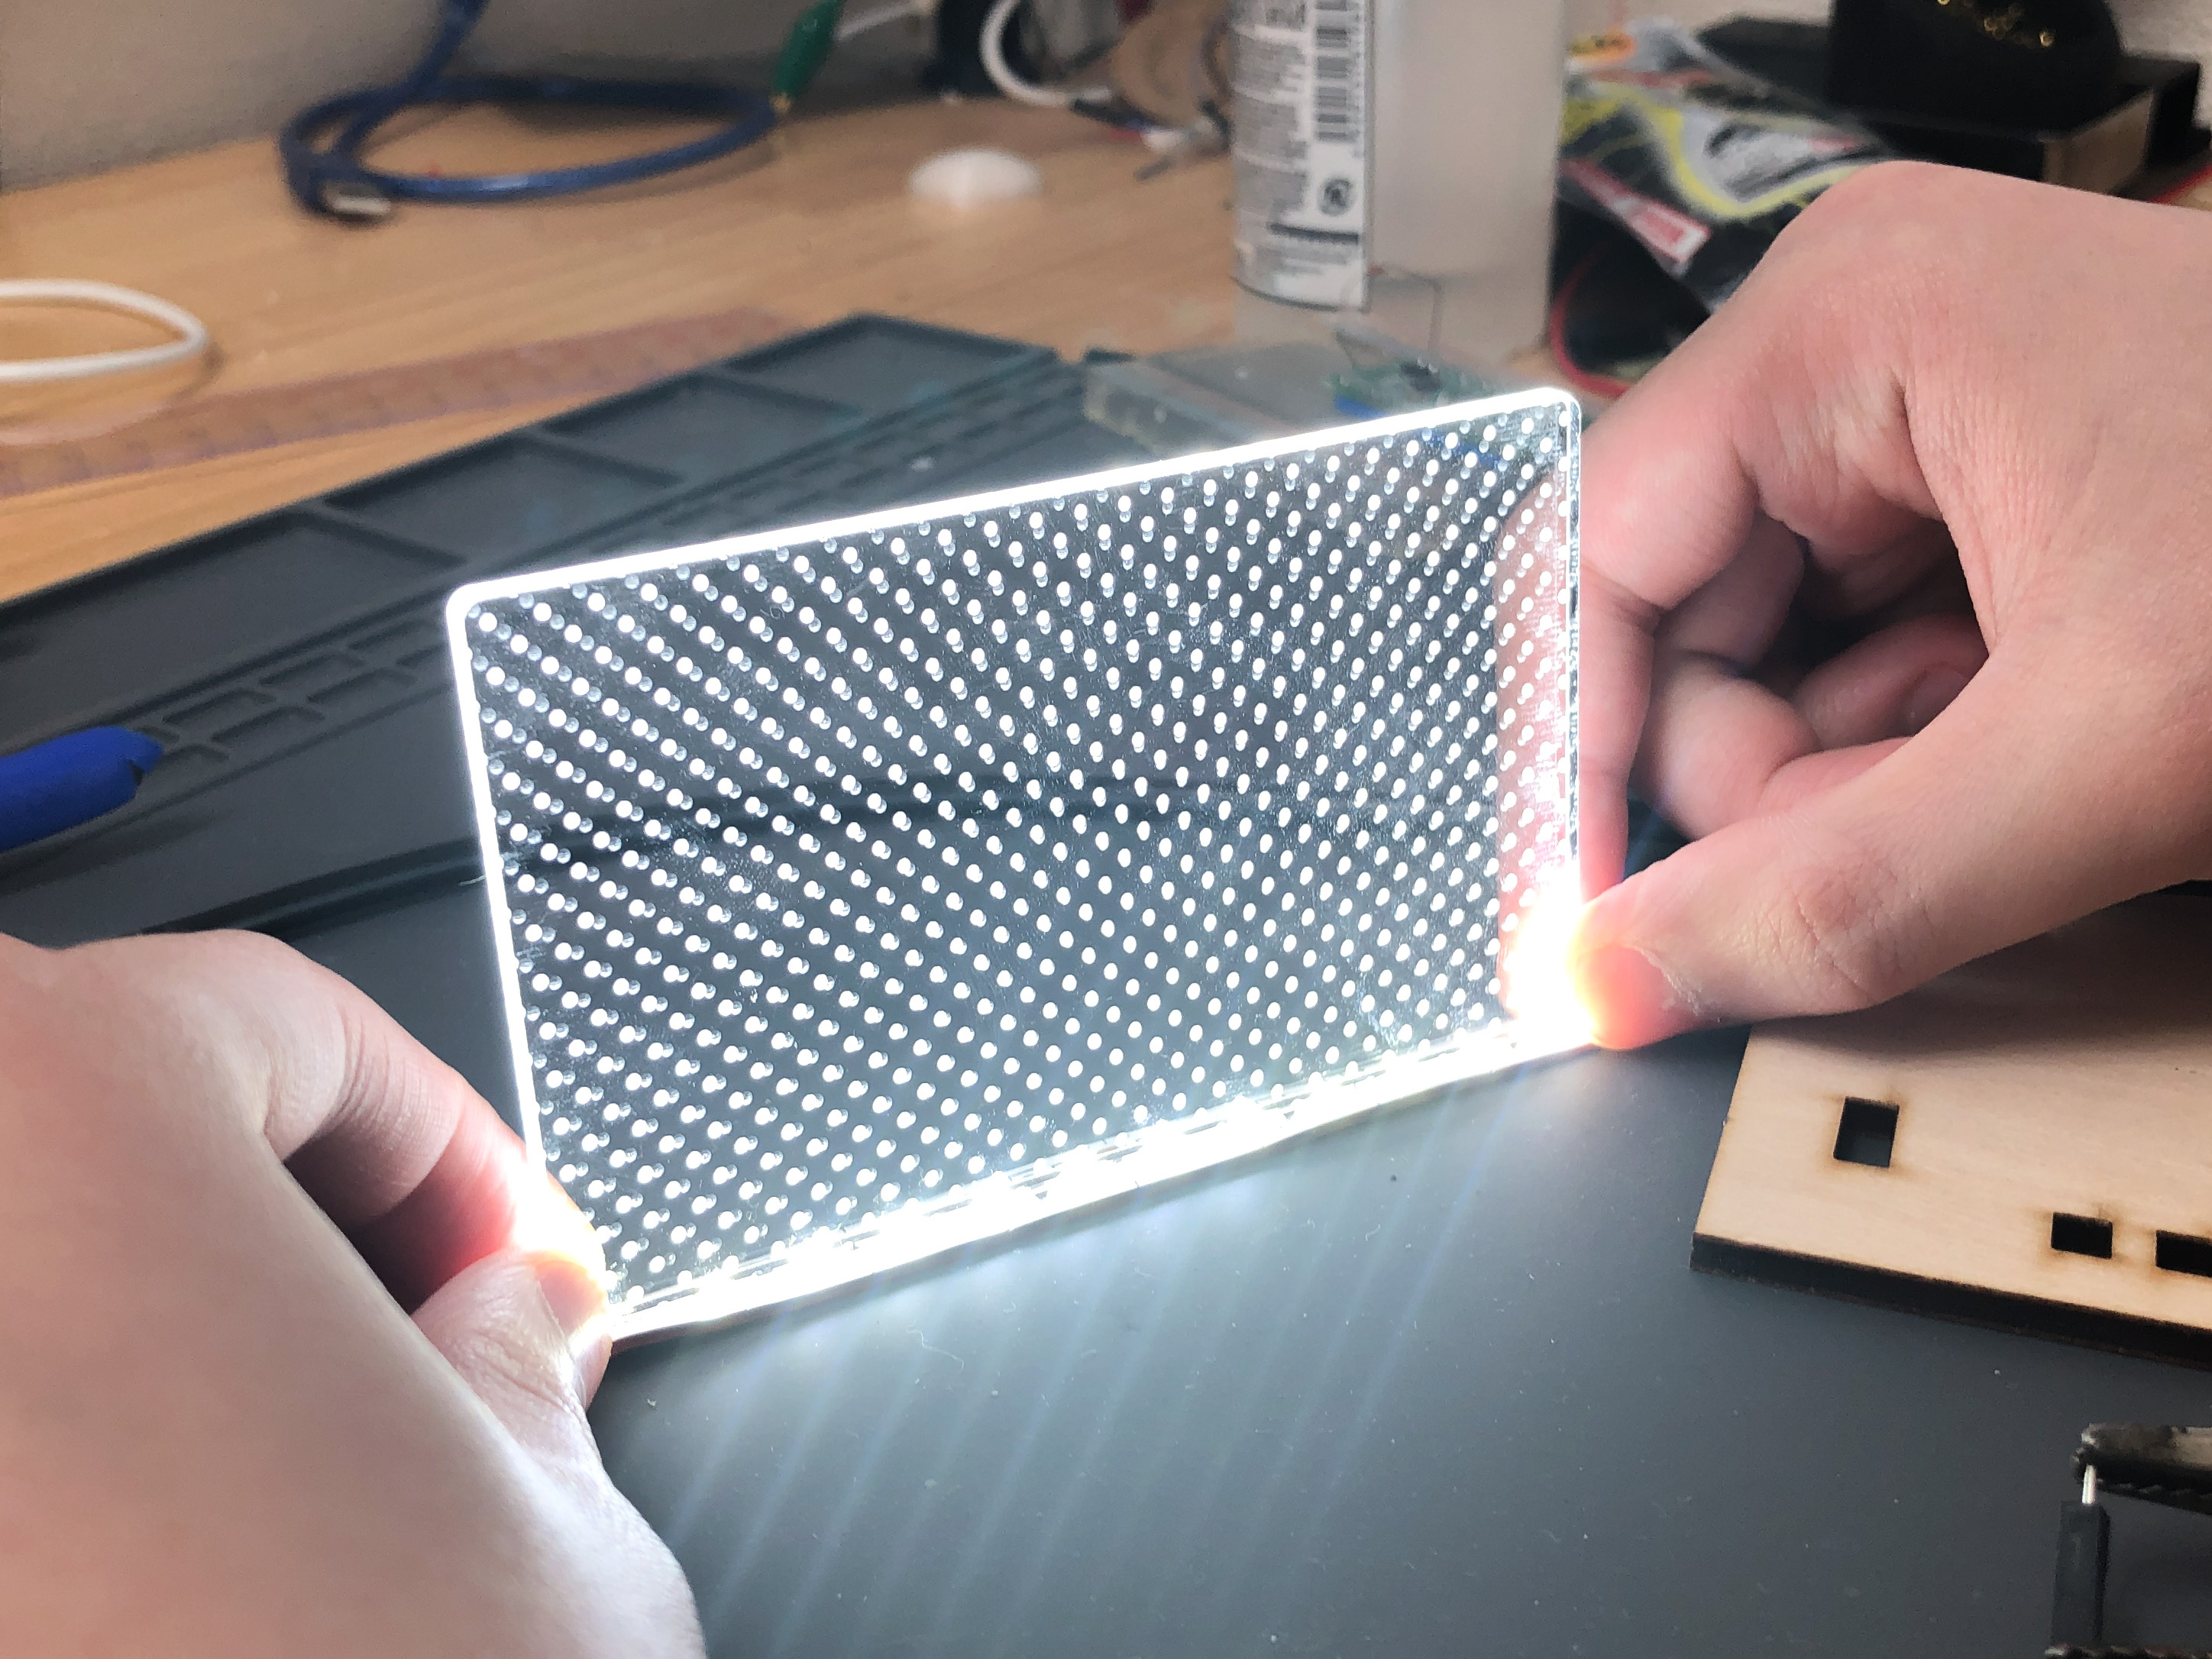 erotisk nikotin statisk Make a flat light emitting lighting by processing acrylic into a light  guide plate with a laser cutter | kohacraft's blog